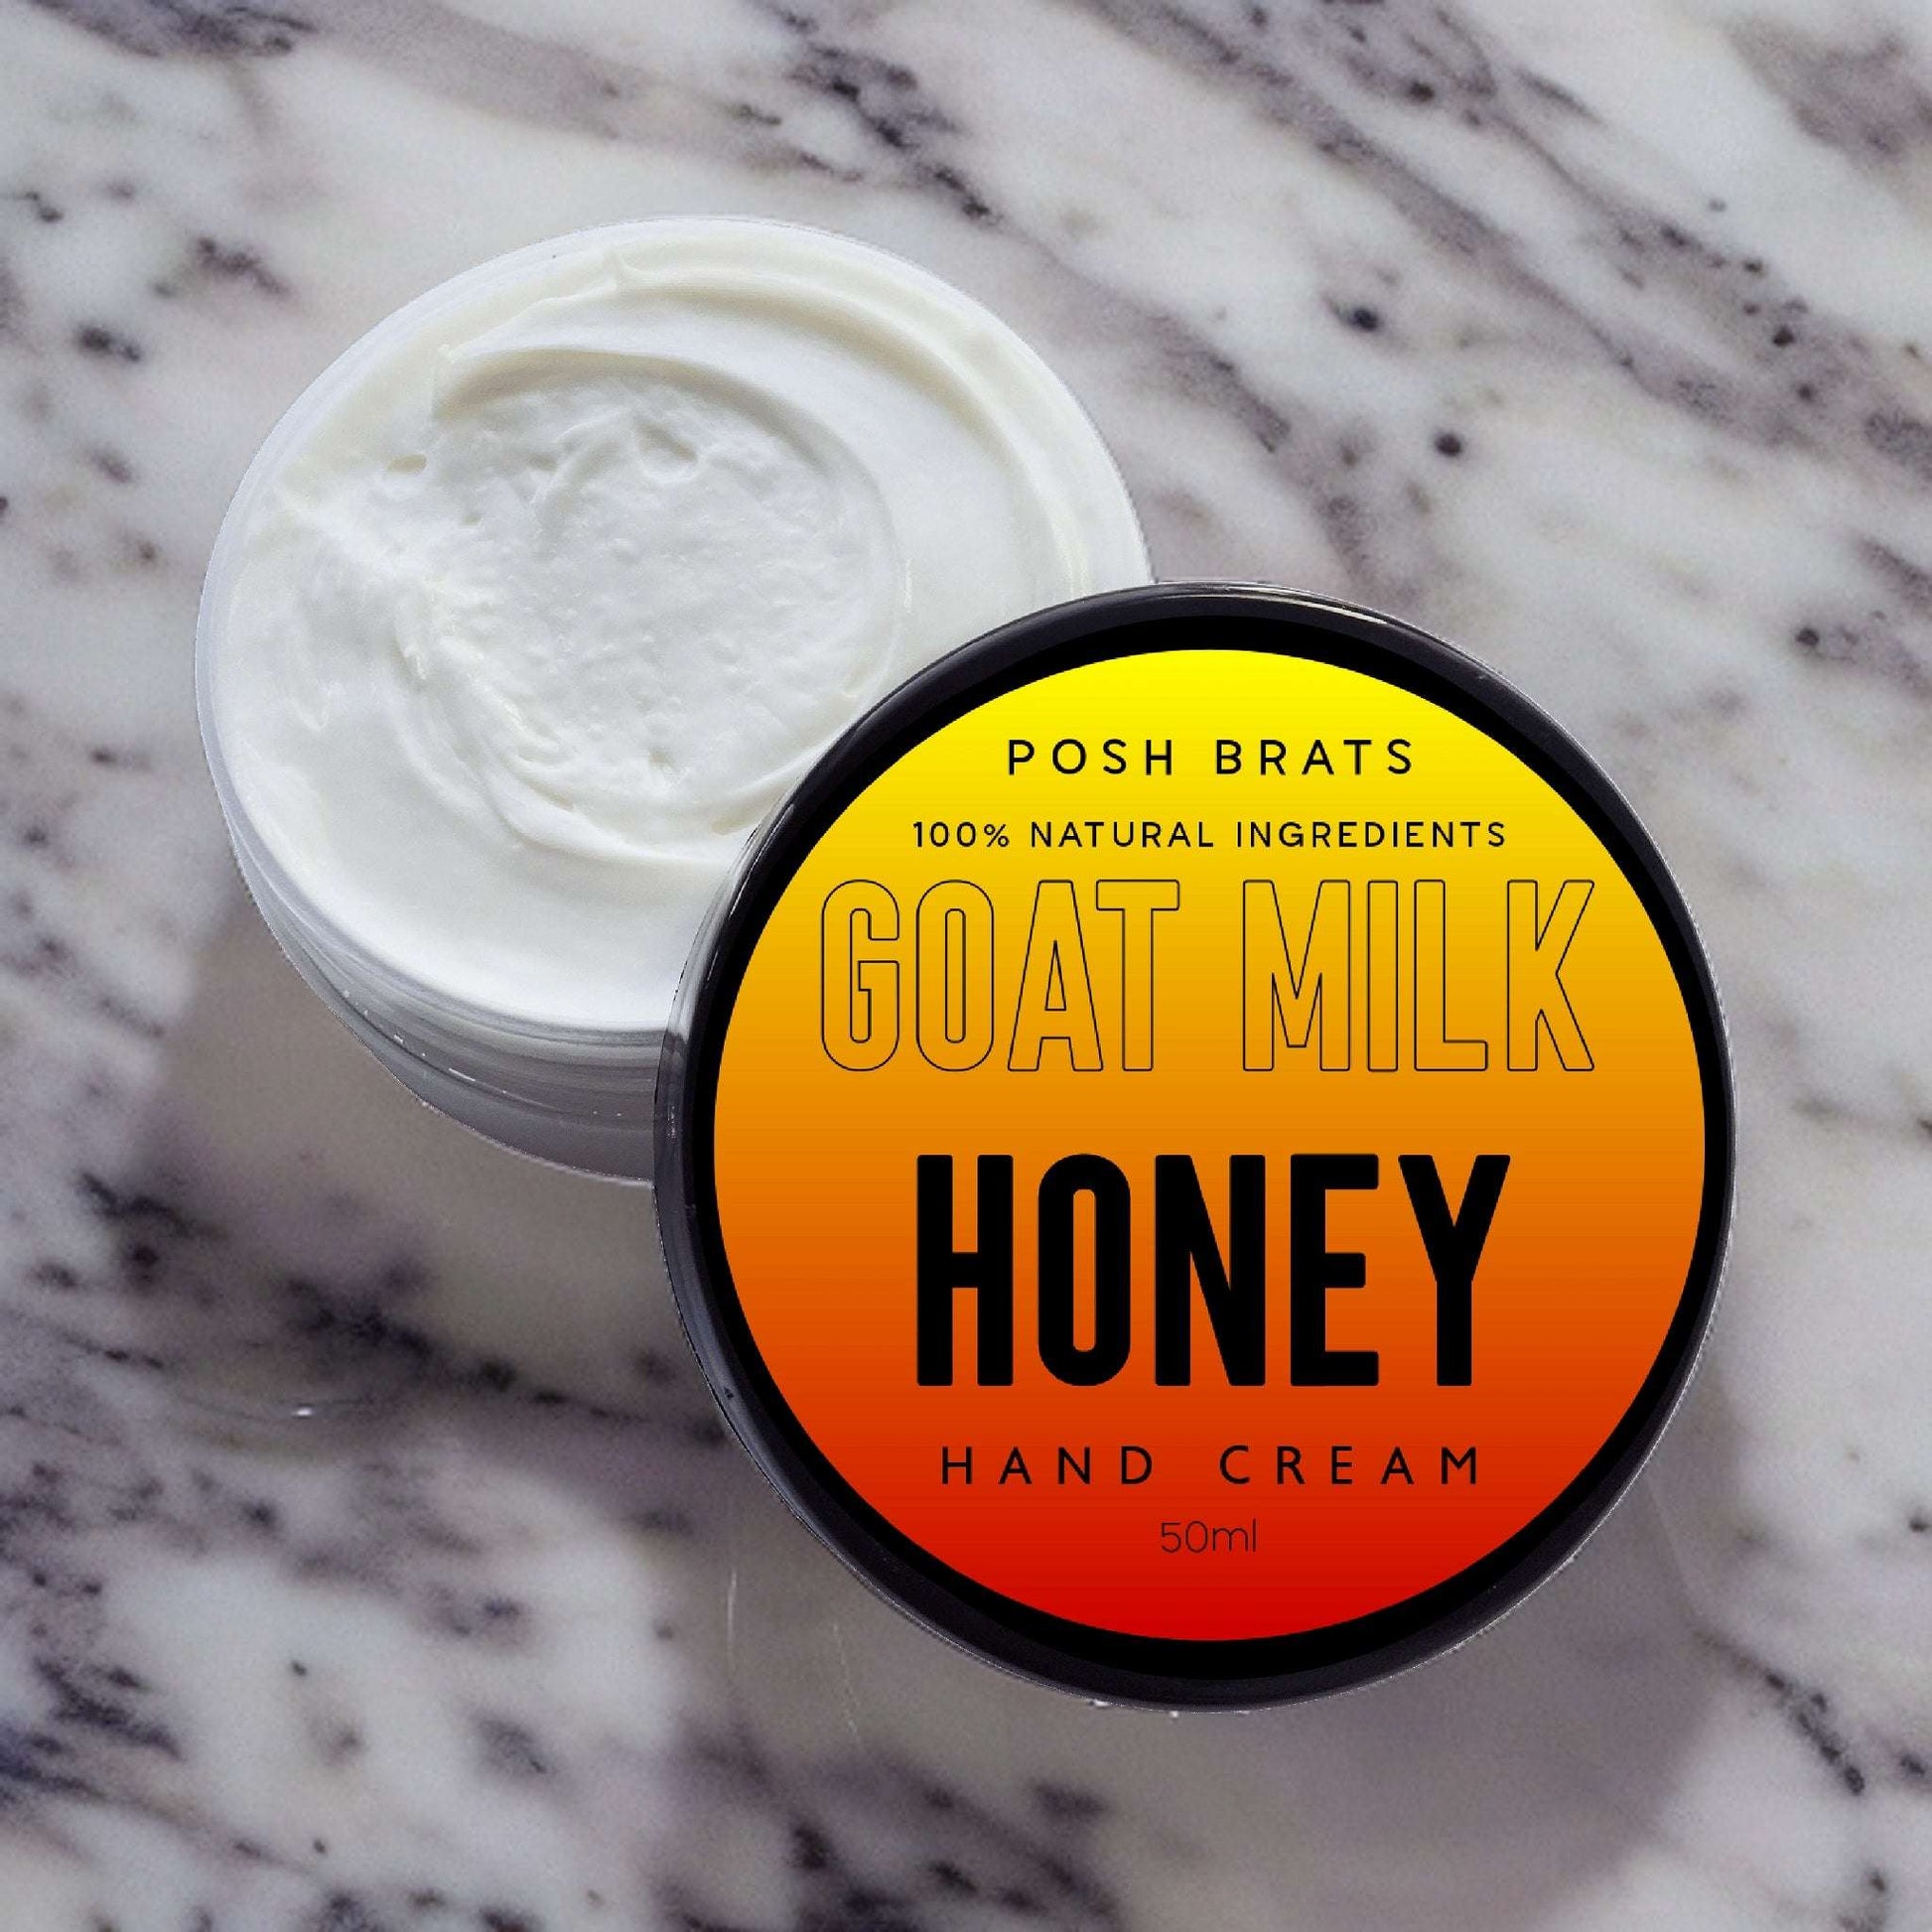 Goat Milk Aloe Vera Honey - Your solution to dry hands! Our soothing repair cream softens and restores your skin.